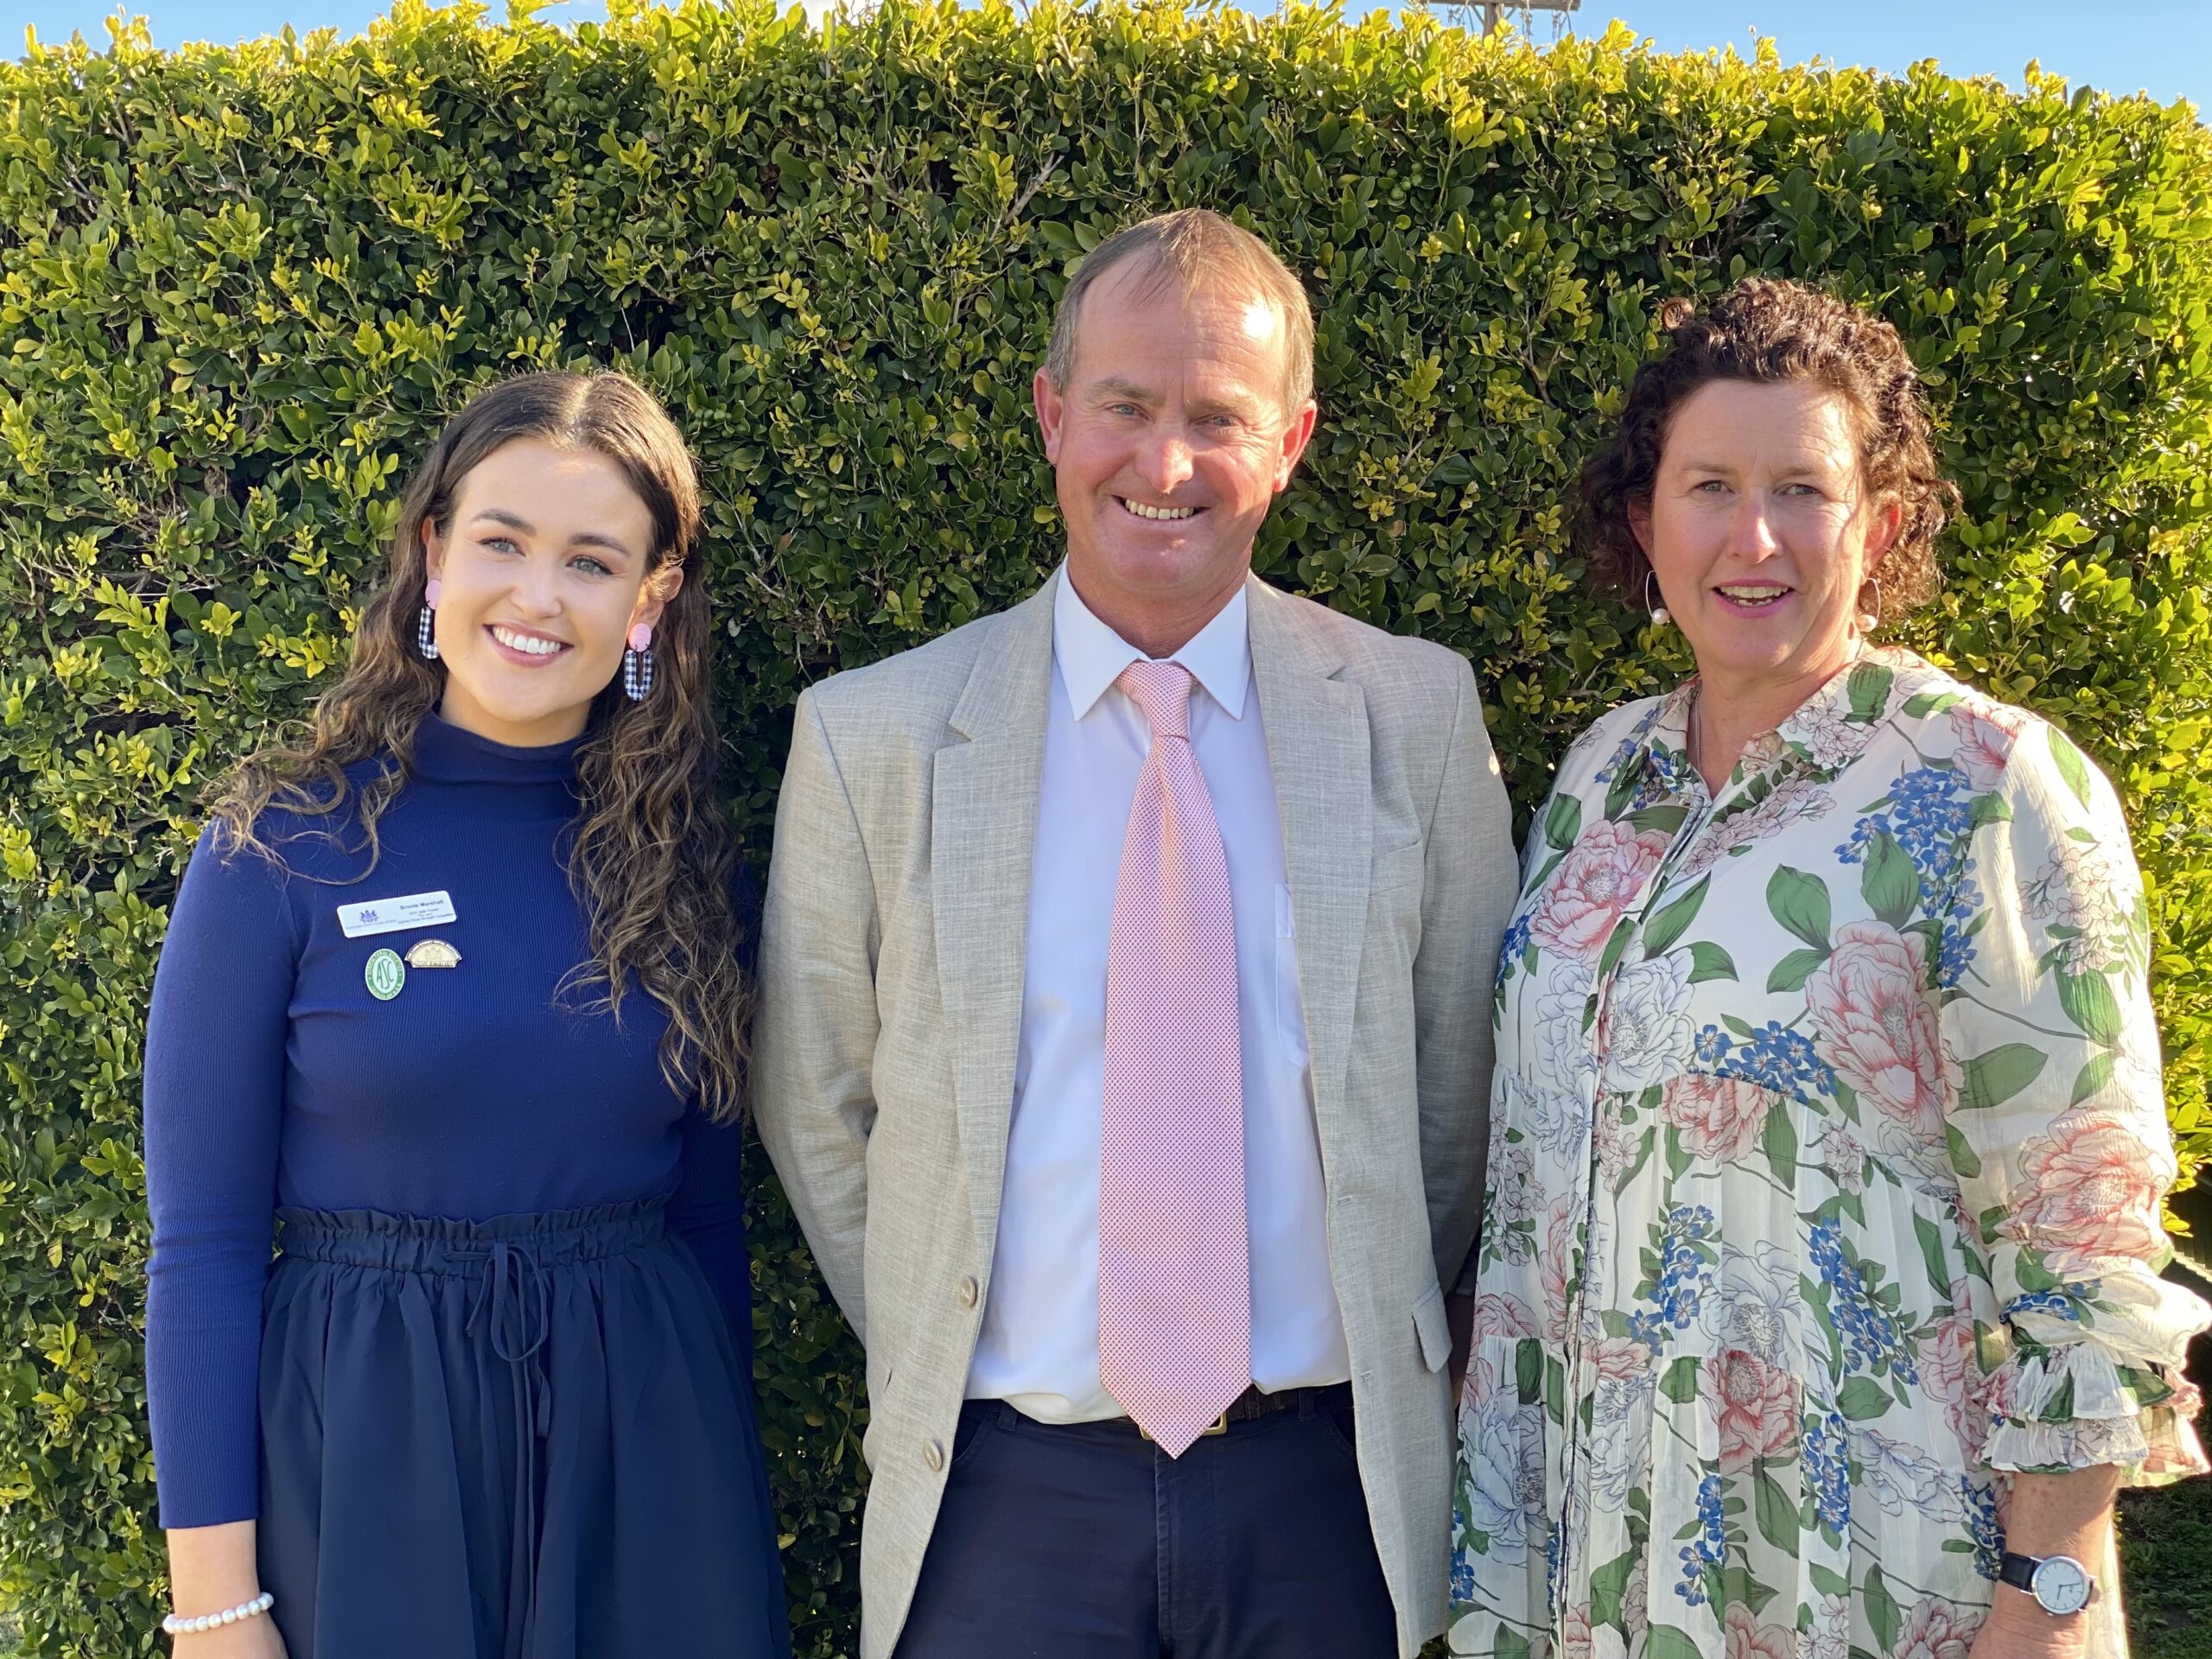 2021 Wee Waa Showgirl judges: 2018 Moree Showgirl and Showgirl coordinator Bronte Marshall with David and Annie Berrel.